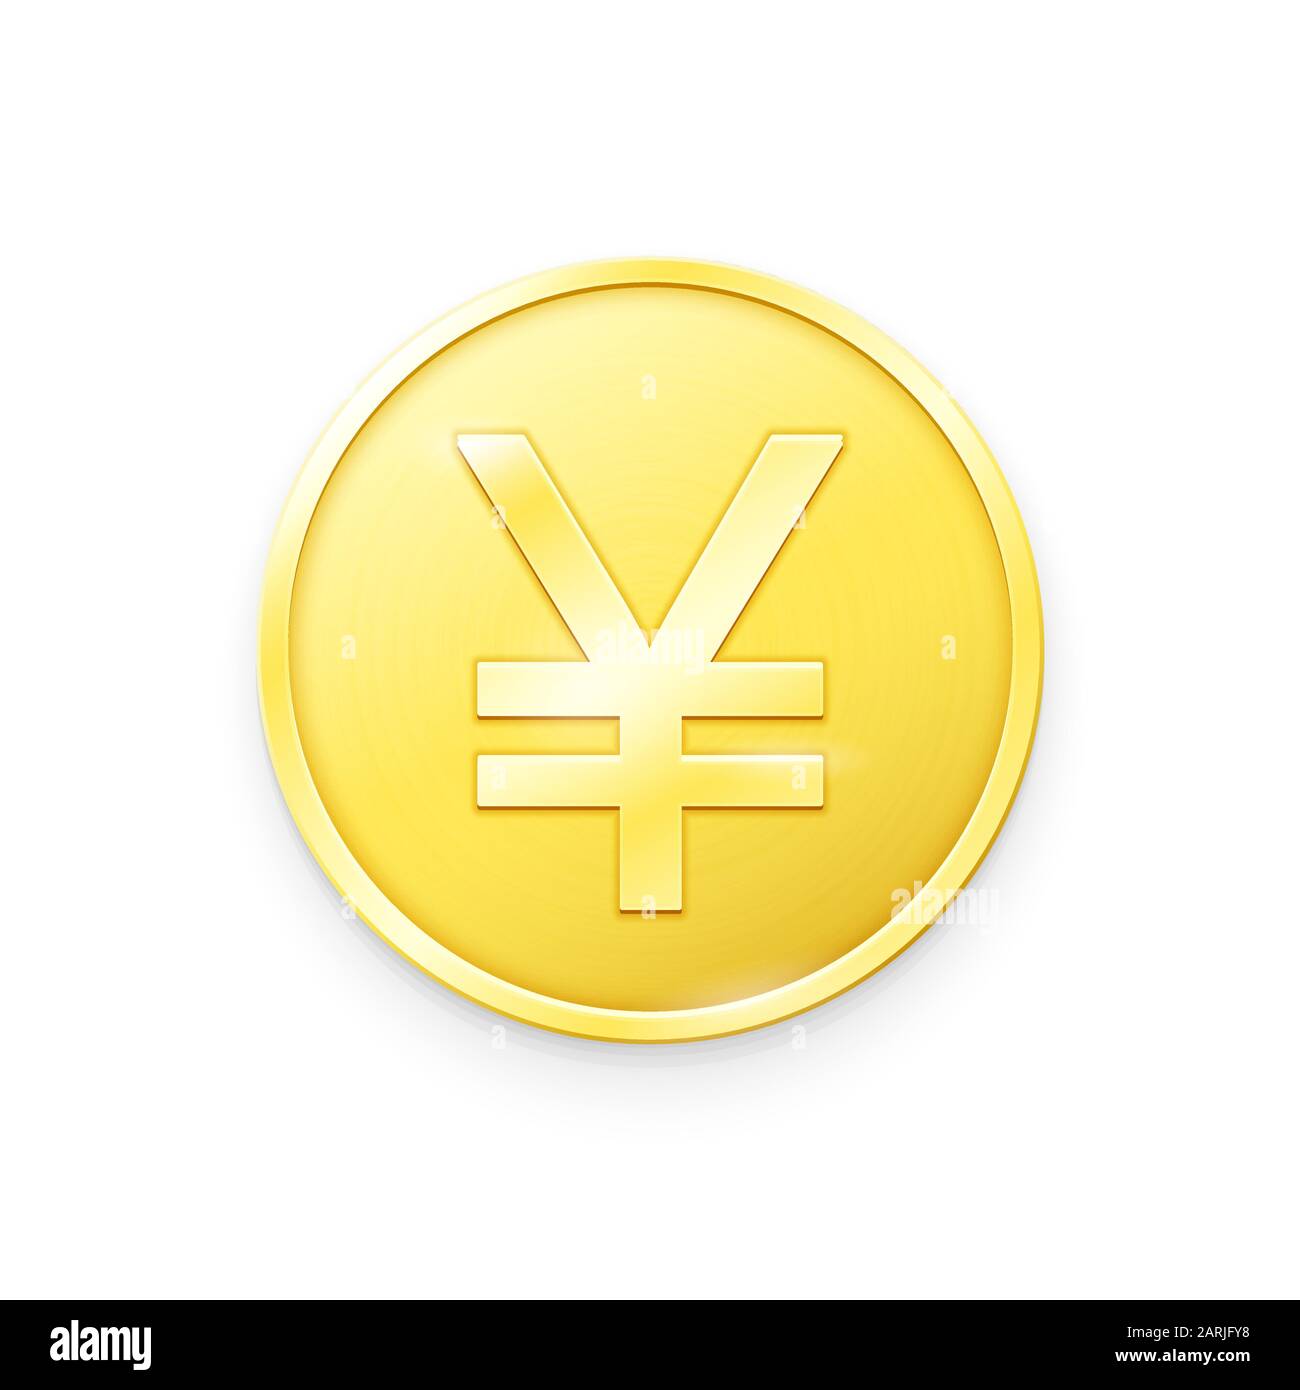 Gold coin with Yen sign.Vector illustration showing the symbol of the currency of Japan in the form of a gold coin Stock Vector